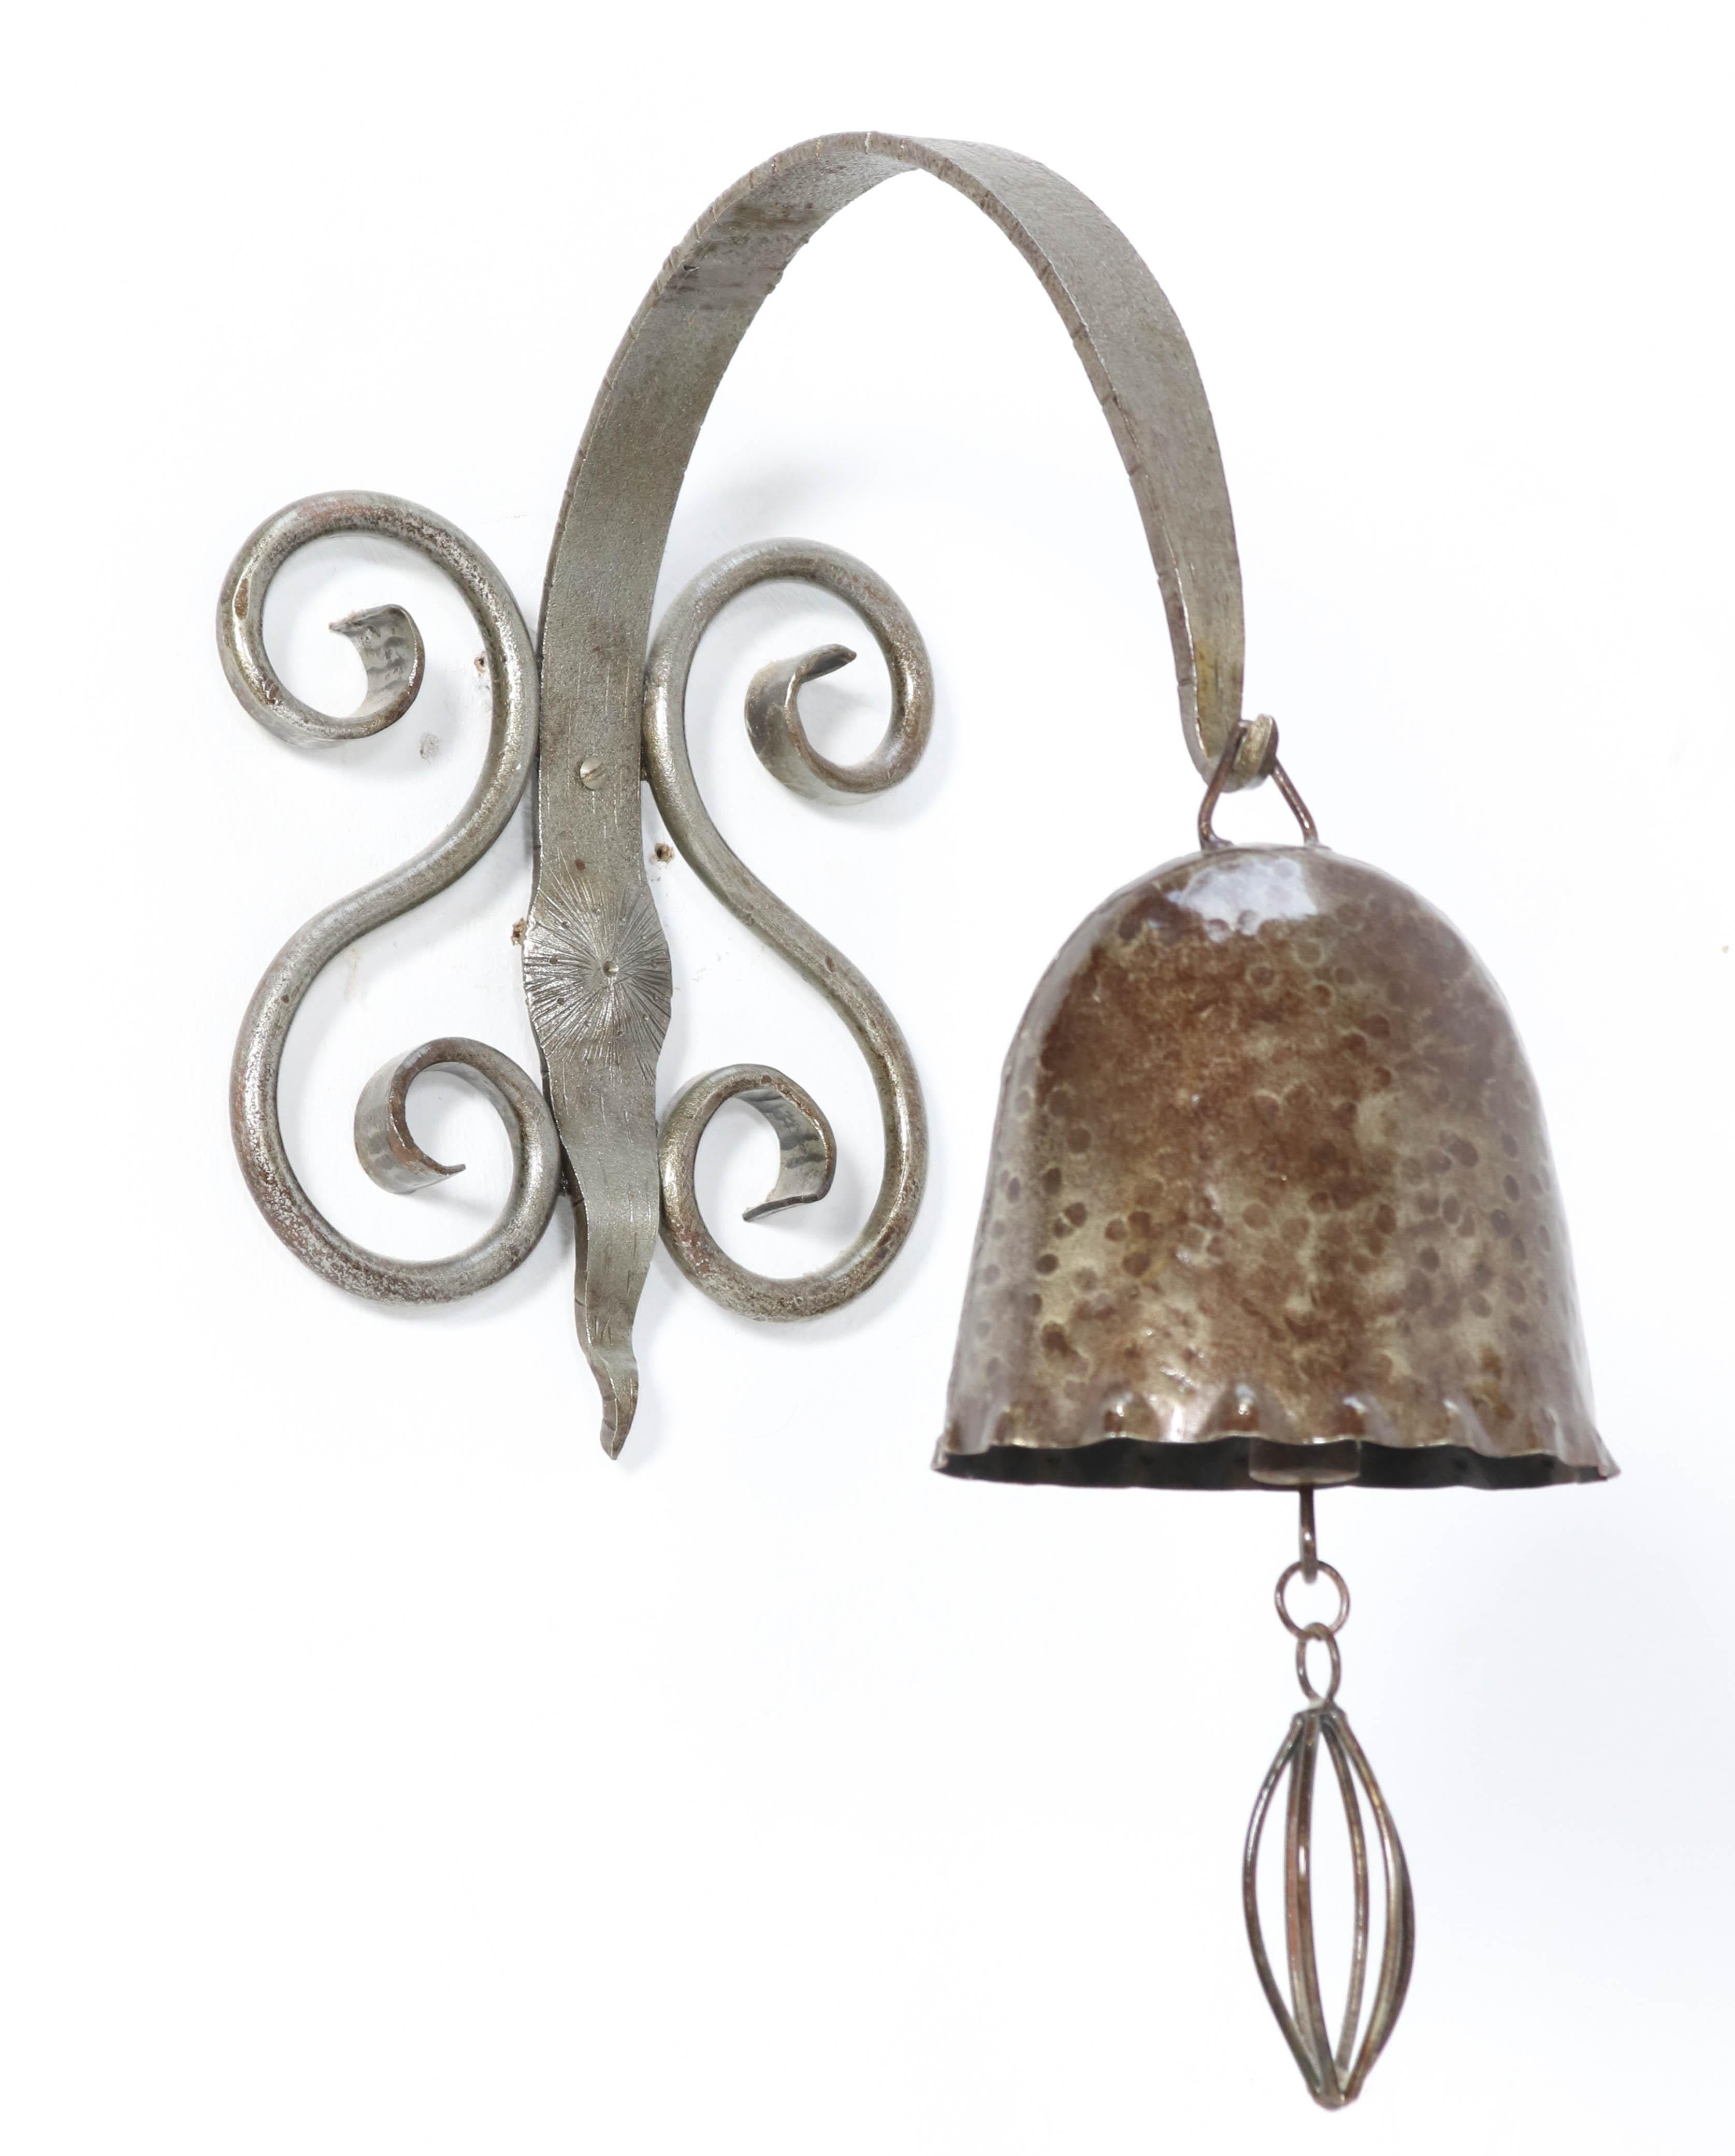 Wonderful Art Deco Amsterdam School gong or bell.
Striking Dutch design from the 1930s.
Patinated wrought iron.
In very good condition with a beautiful patina.